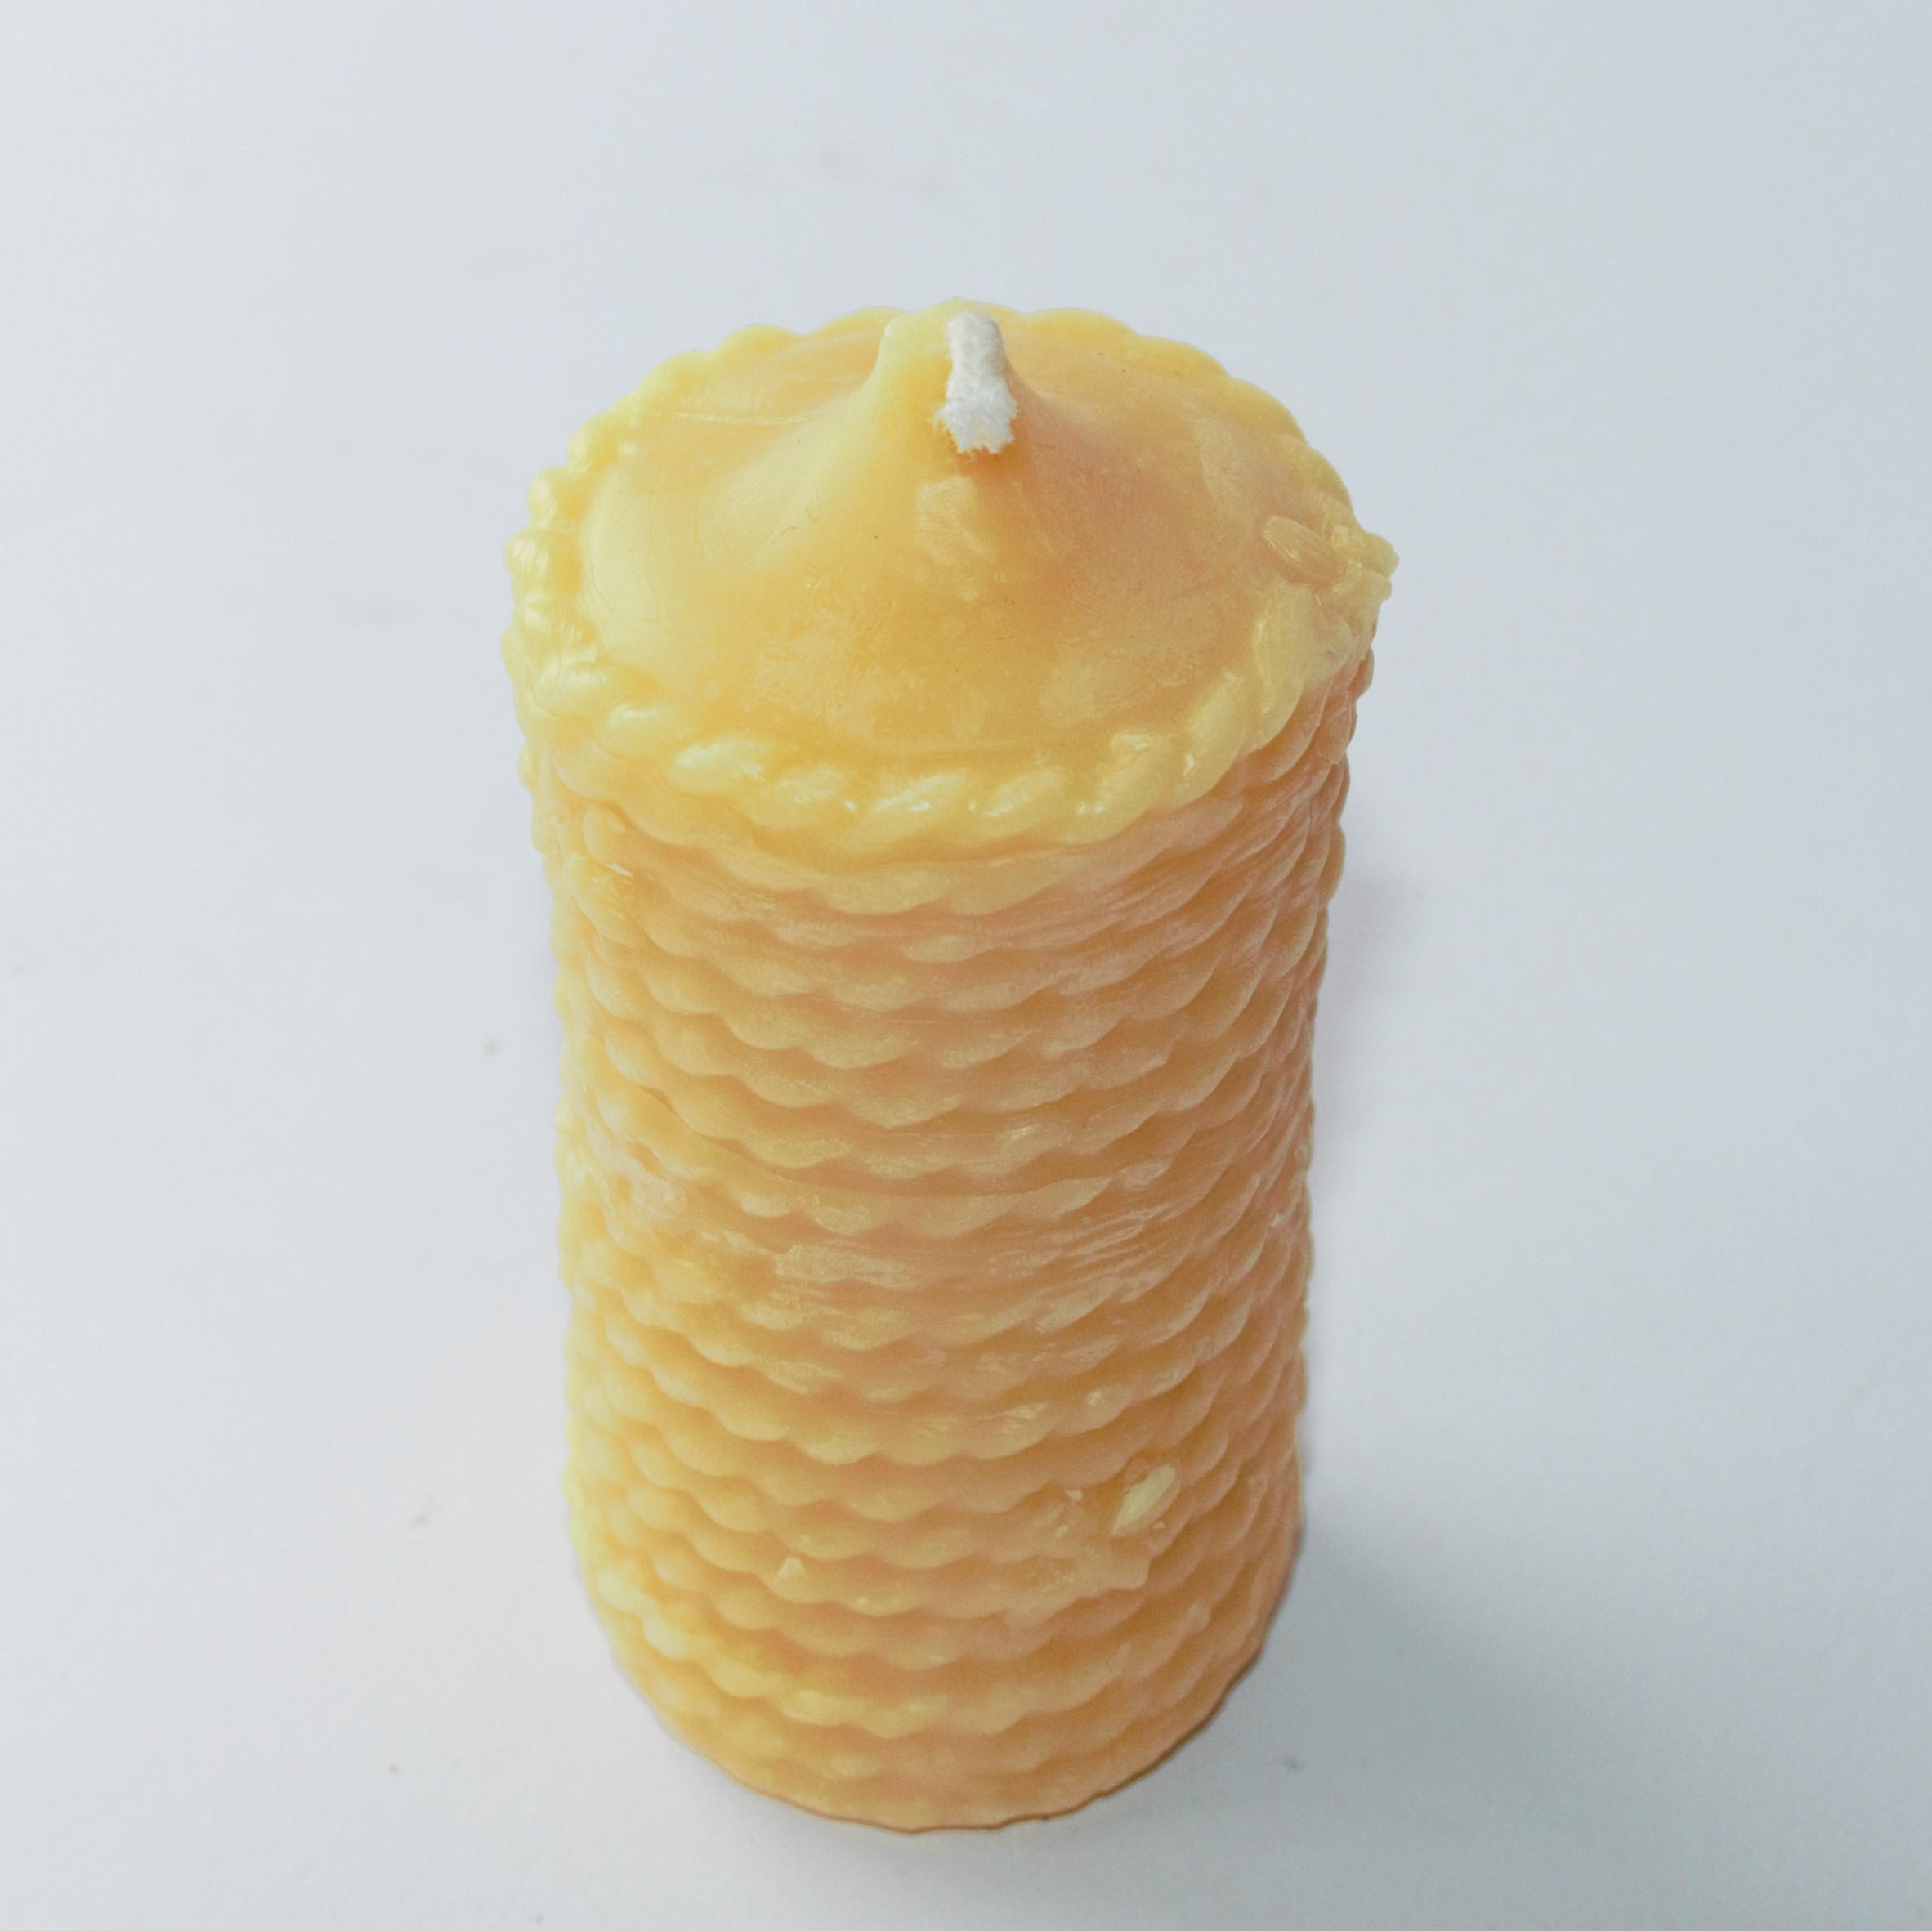 Bees on rope pure beeswax candle